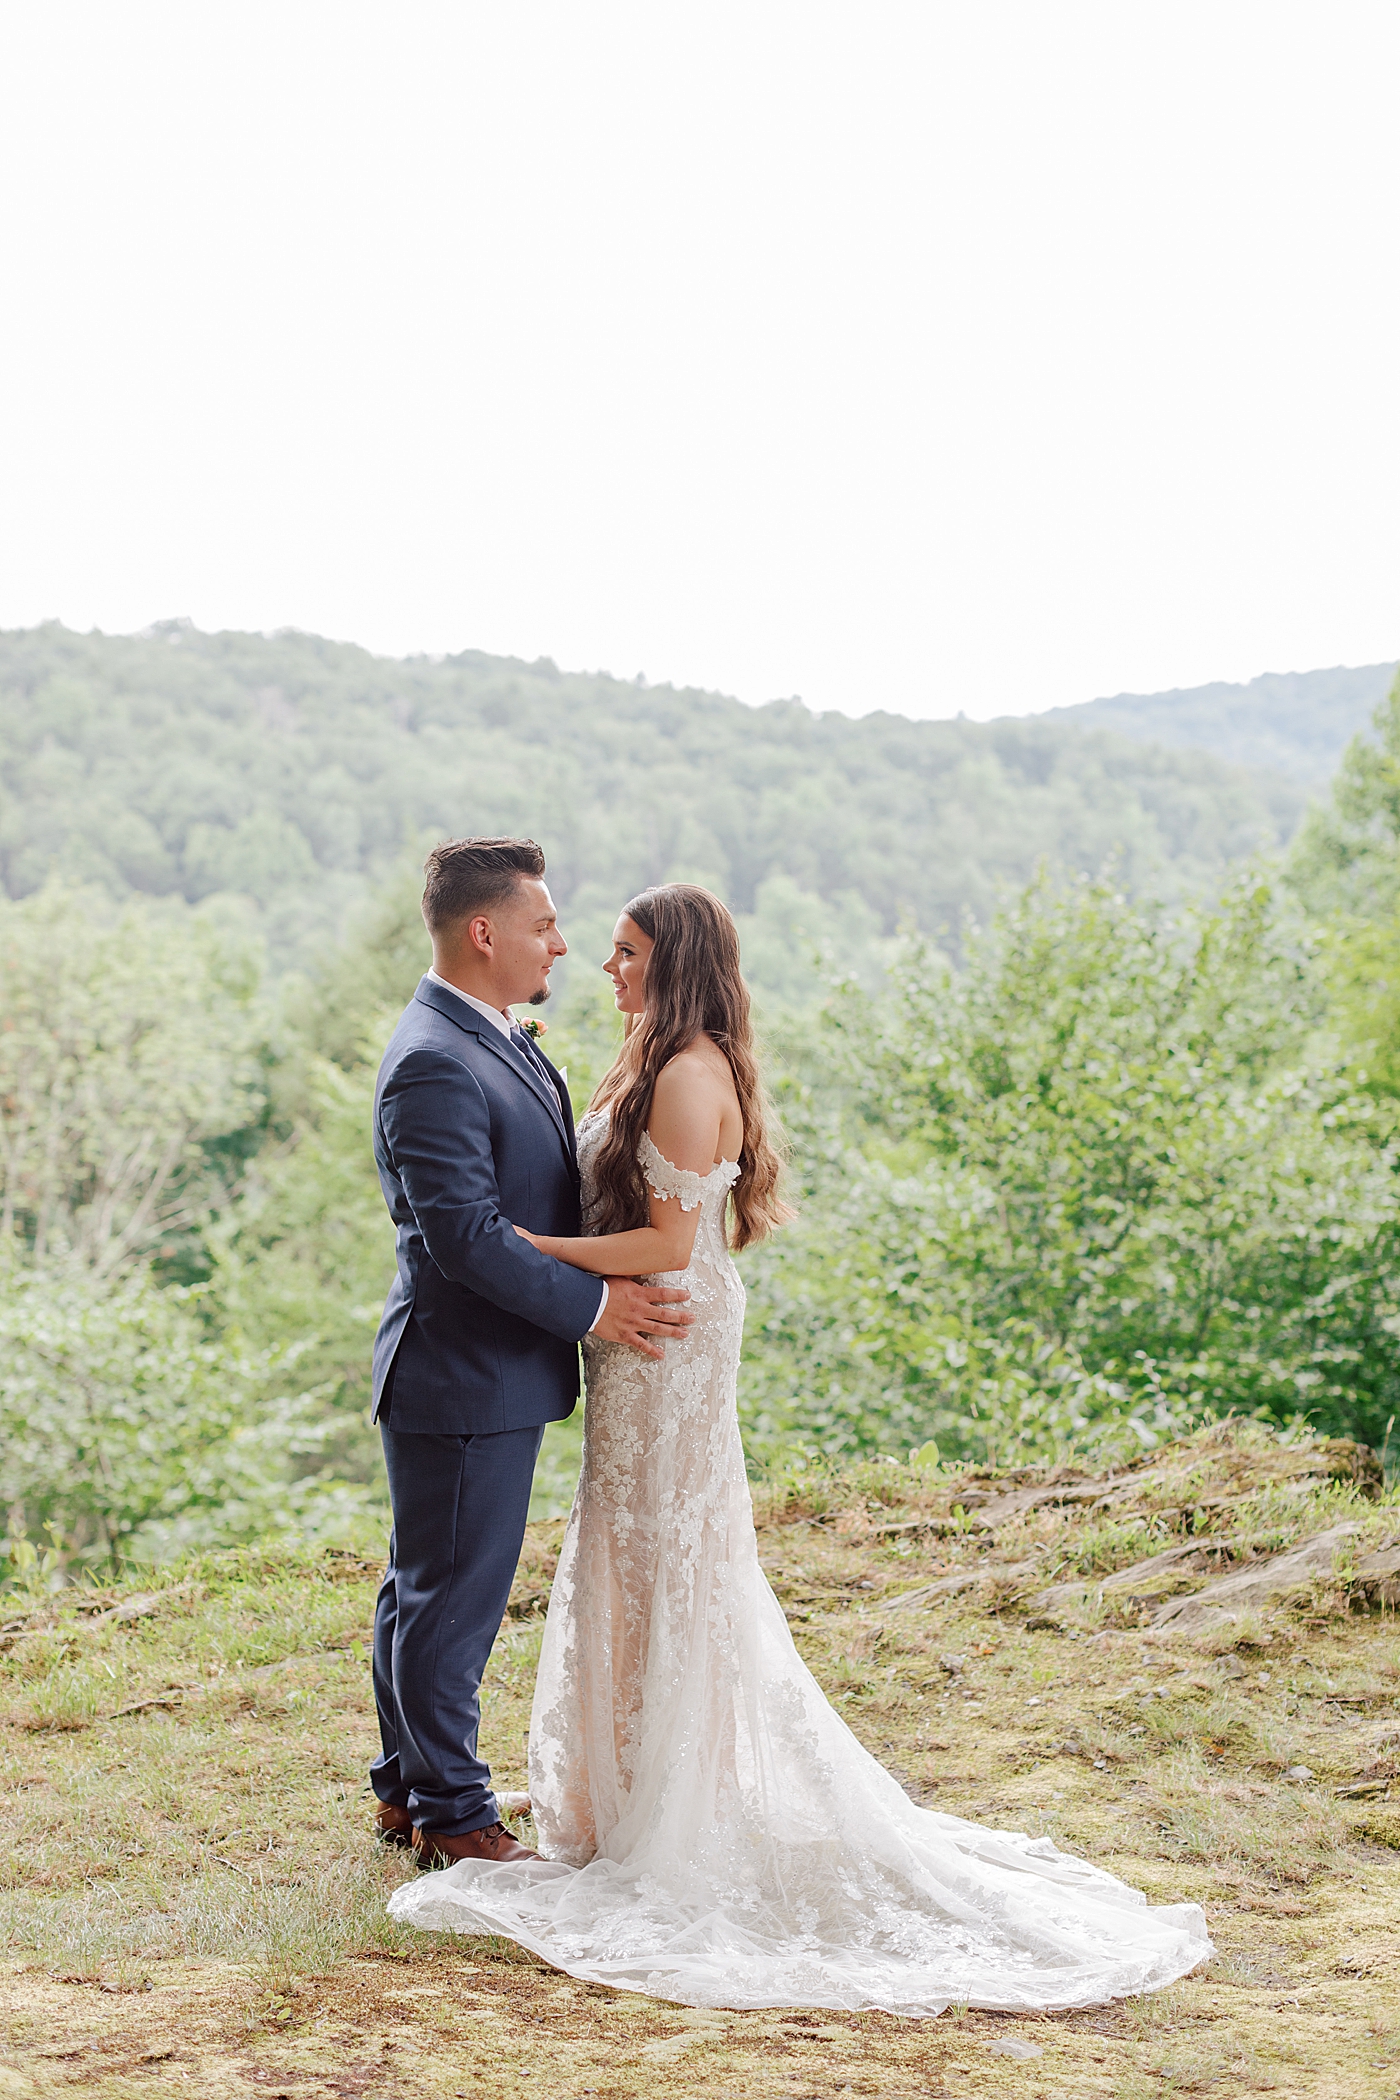 Bride and groom embracing with mountains in the background | Image by Hope Helmuth Photography 